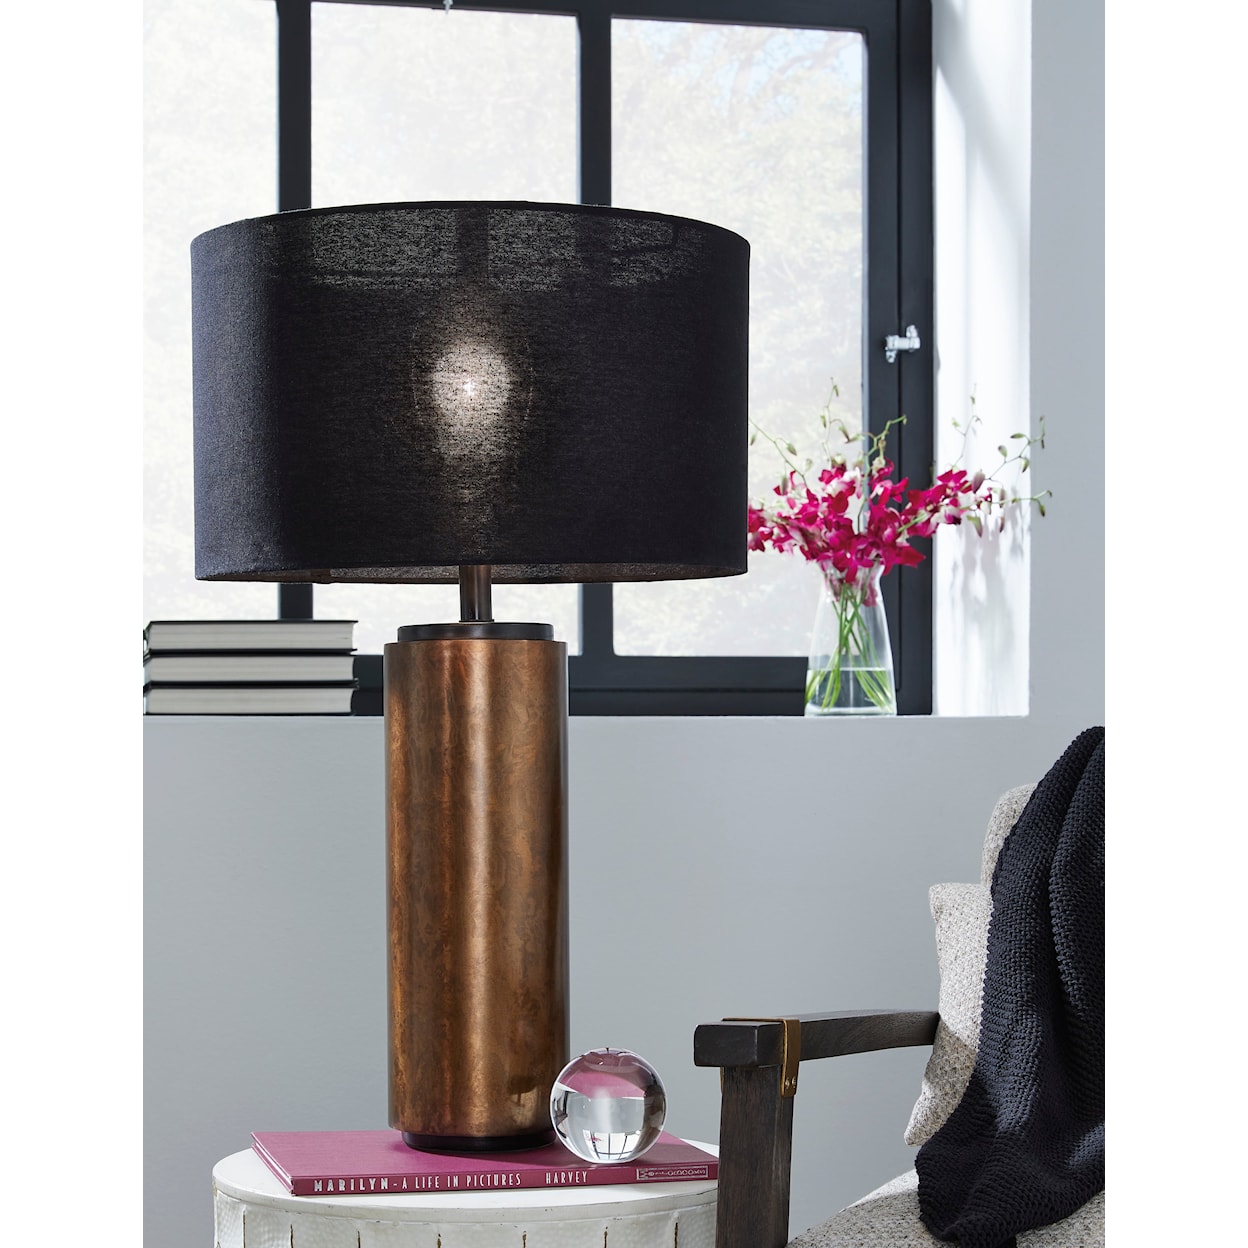 Signature Design by Ashley Lamps - Contemporary Hildry Table Lamp